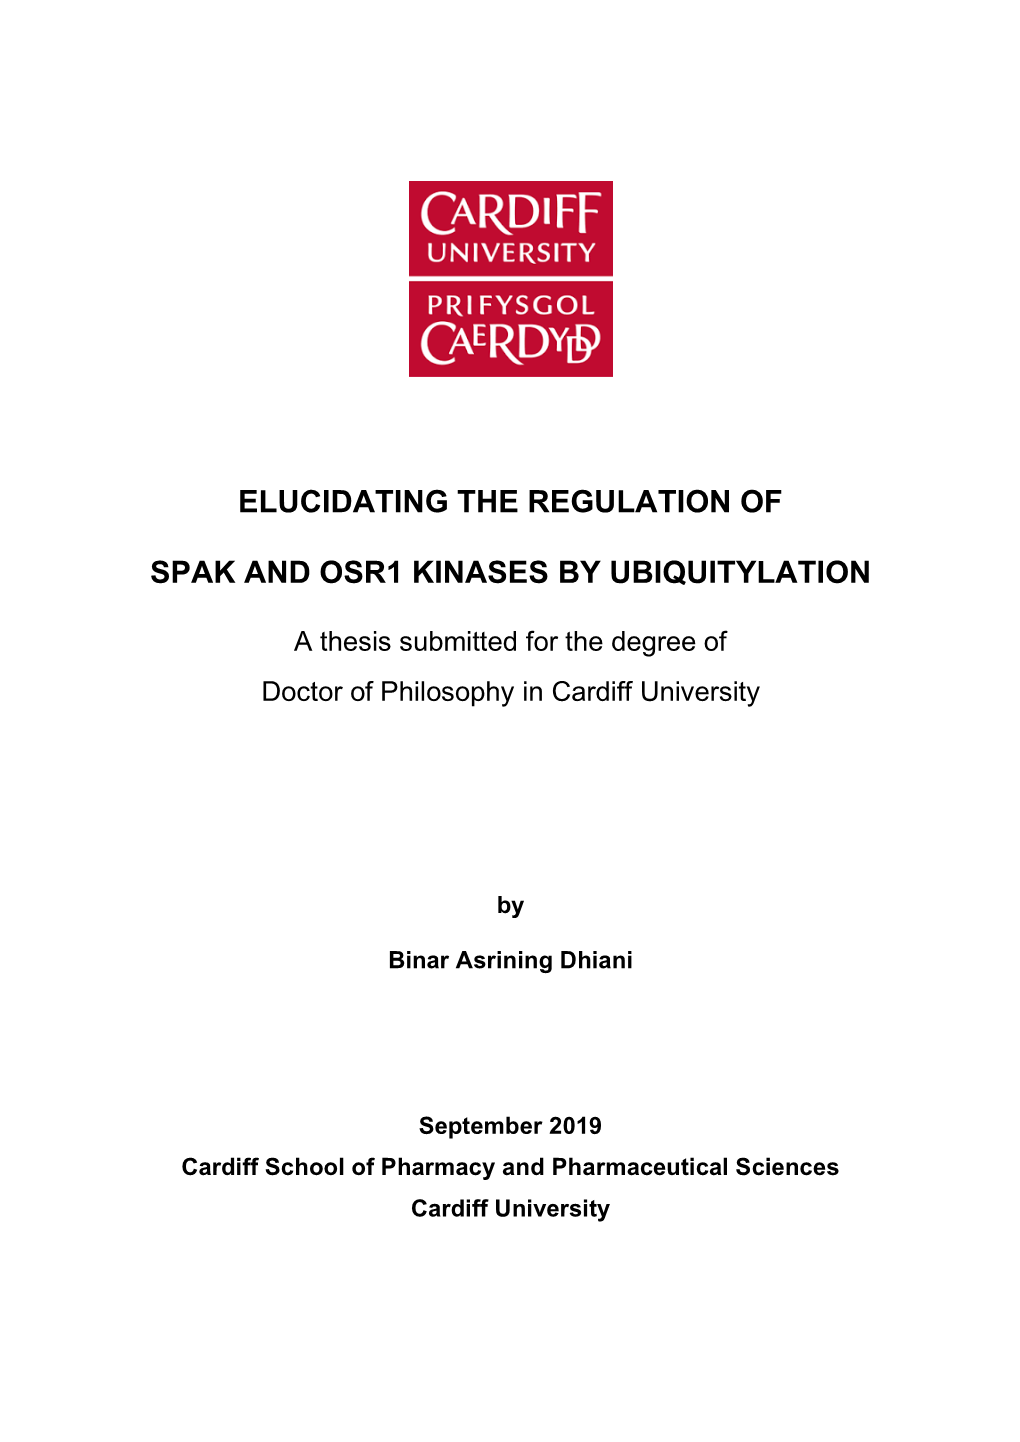 Elucidating the Regulation of Spak and Osr1 Kinases By